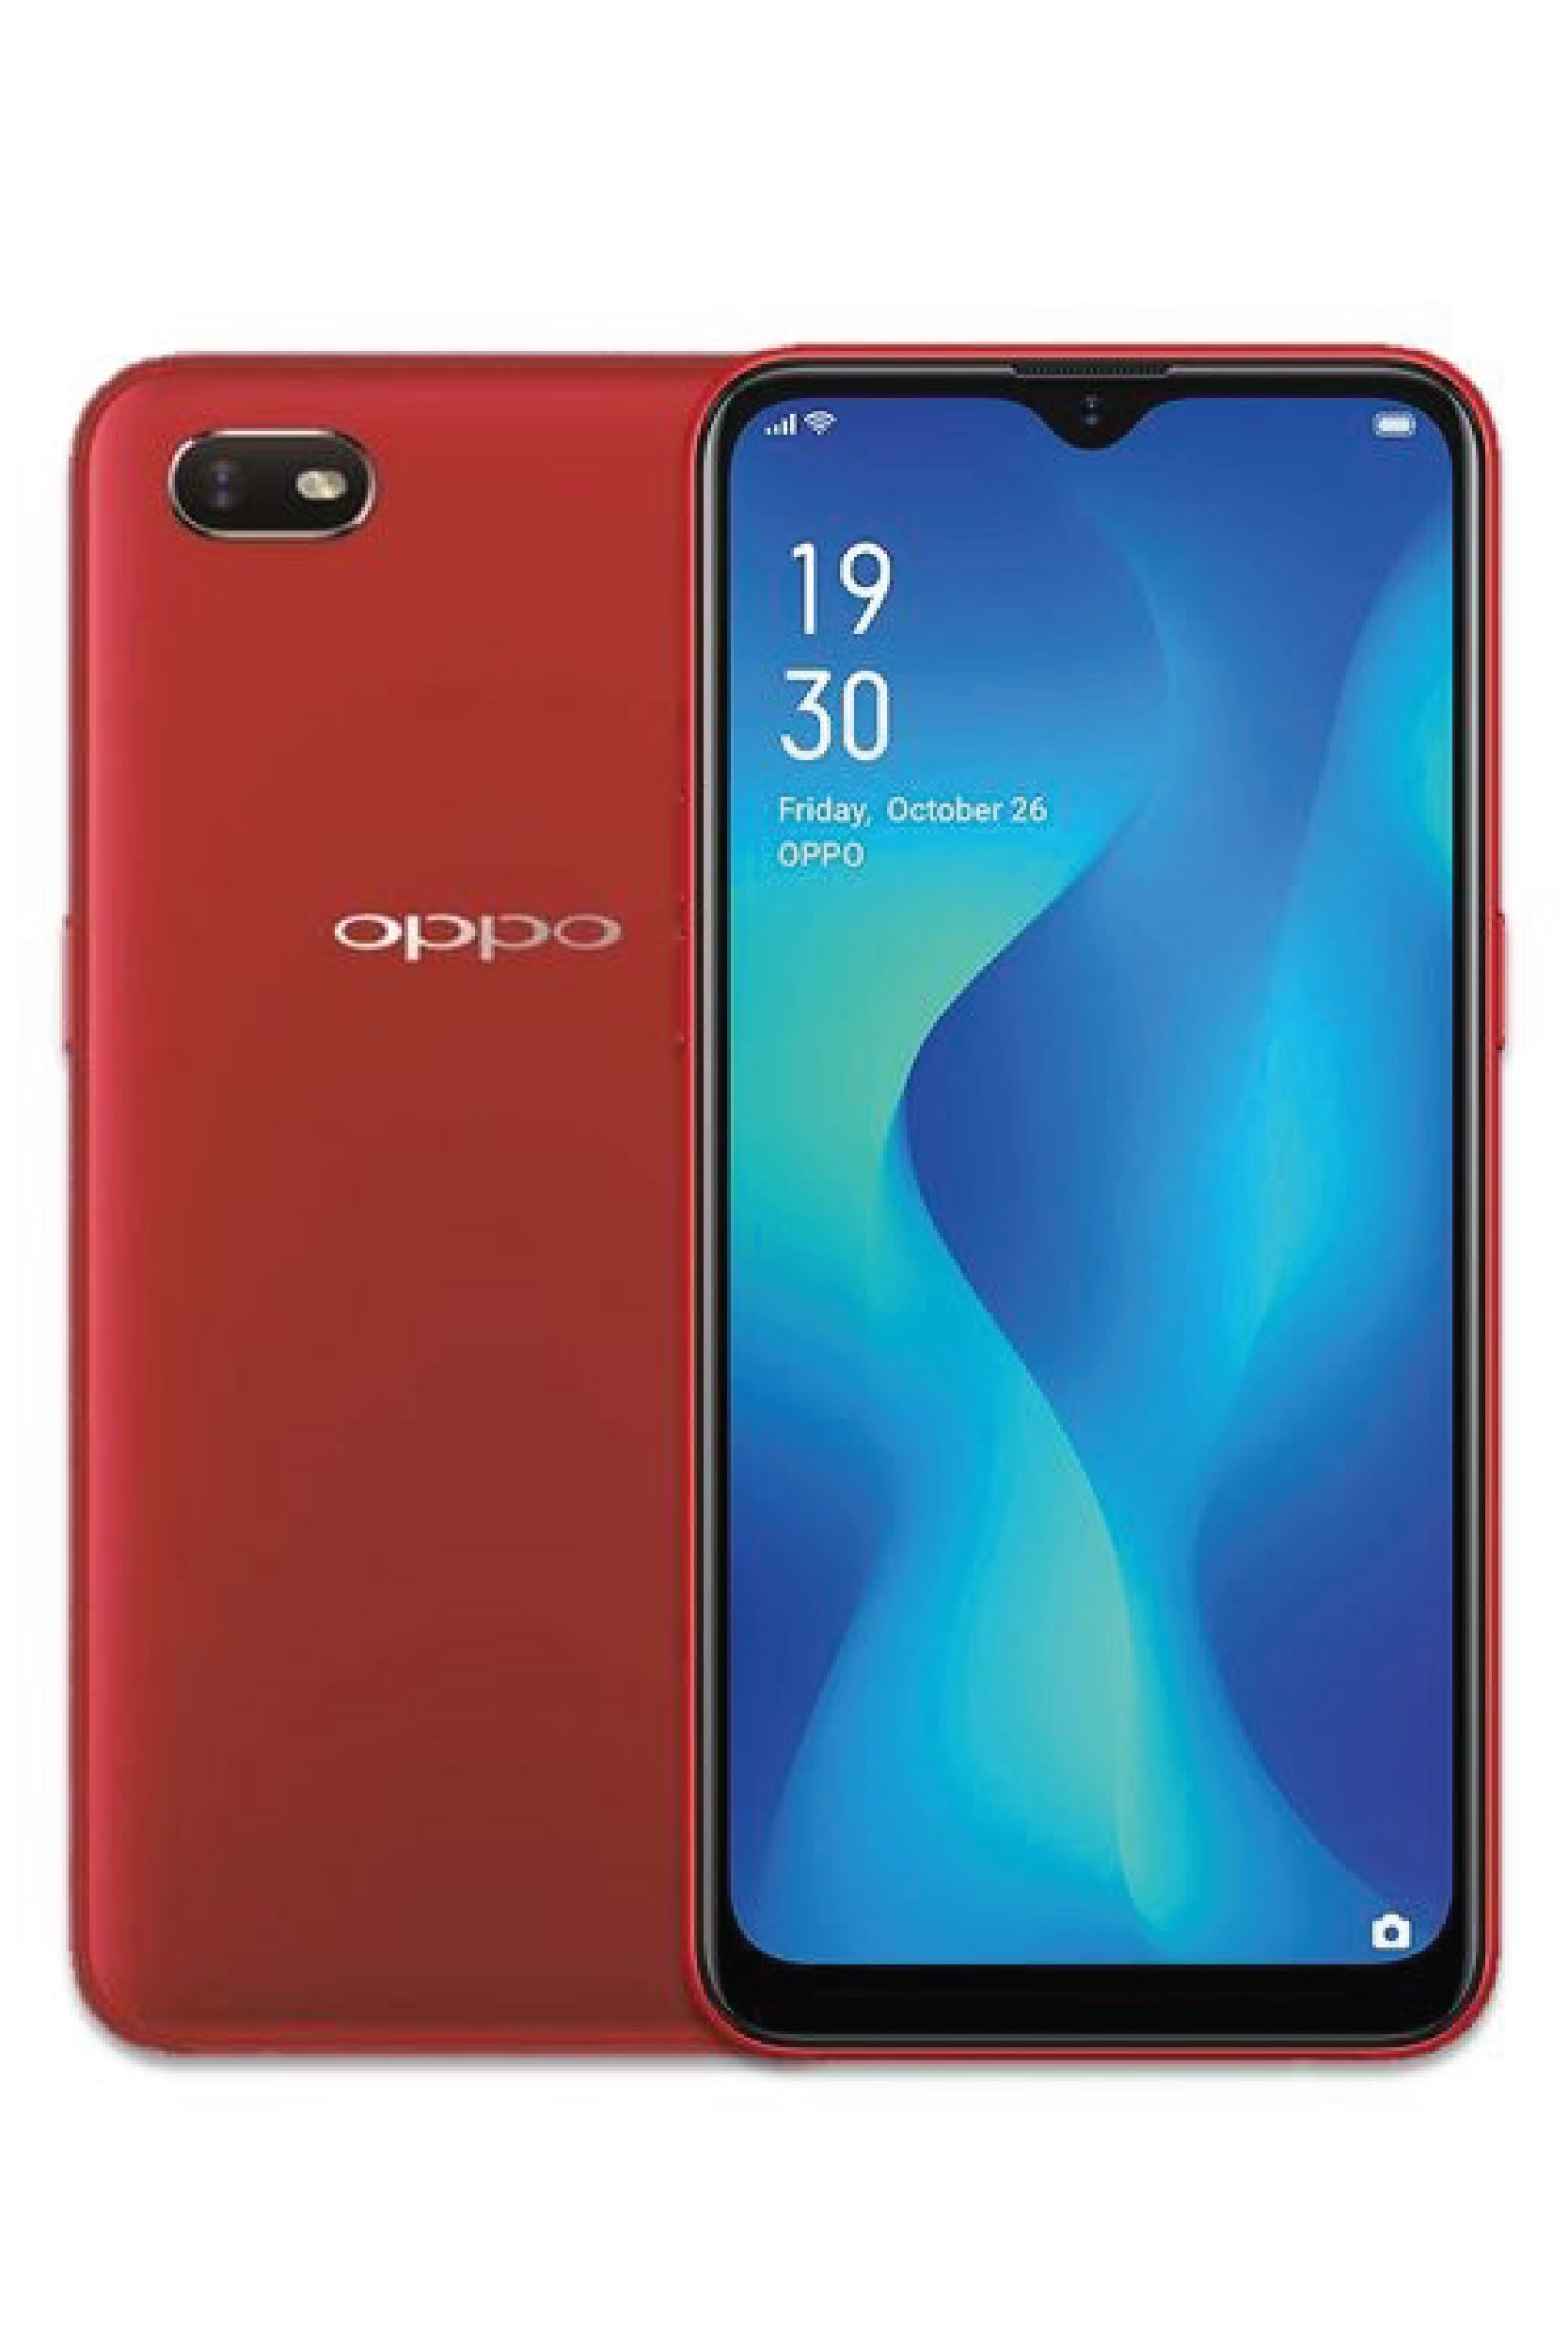 Oppo A1K Price in Pakistan & Specs: Daily Updated | ProPakistani